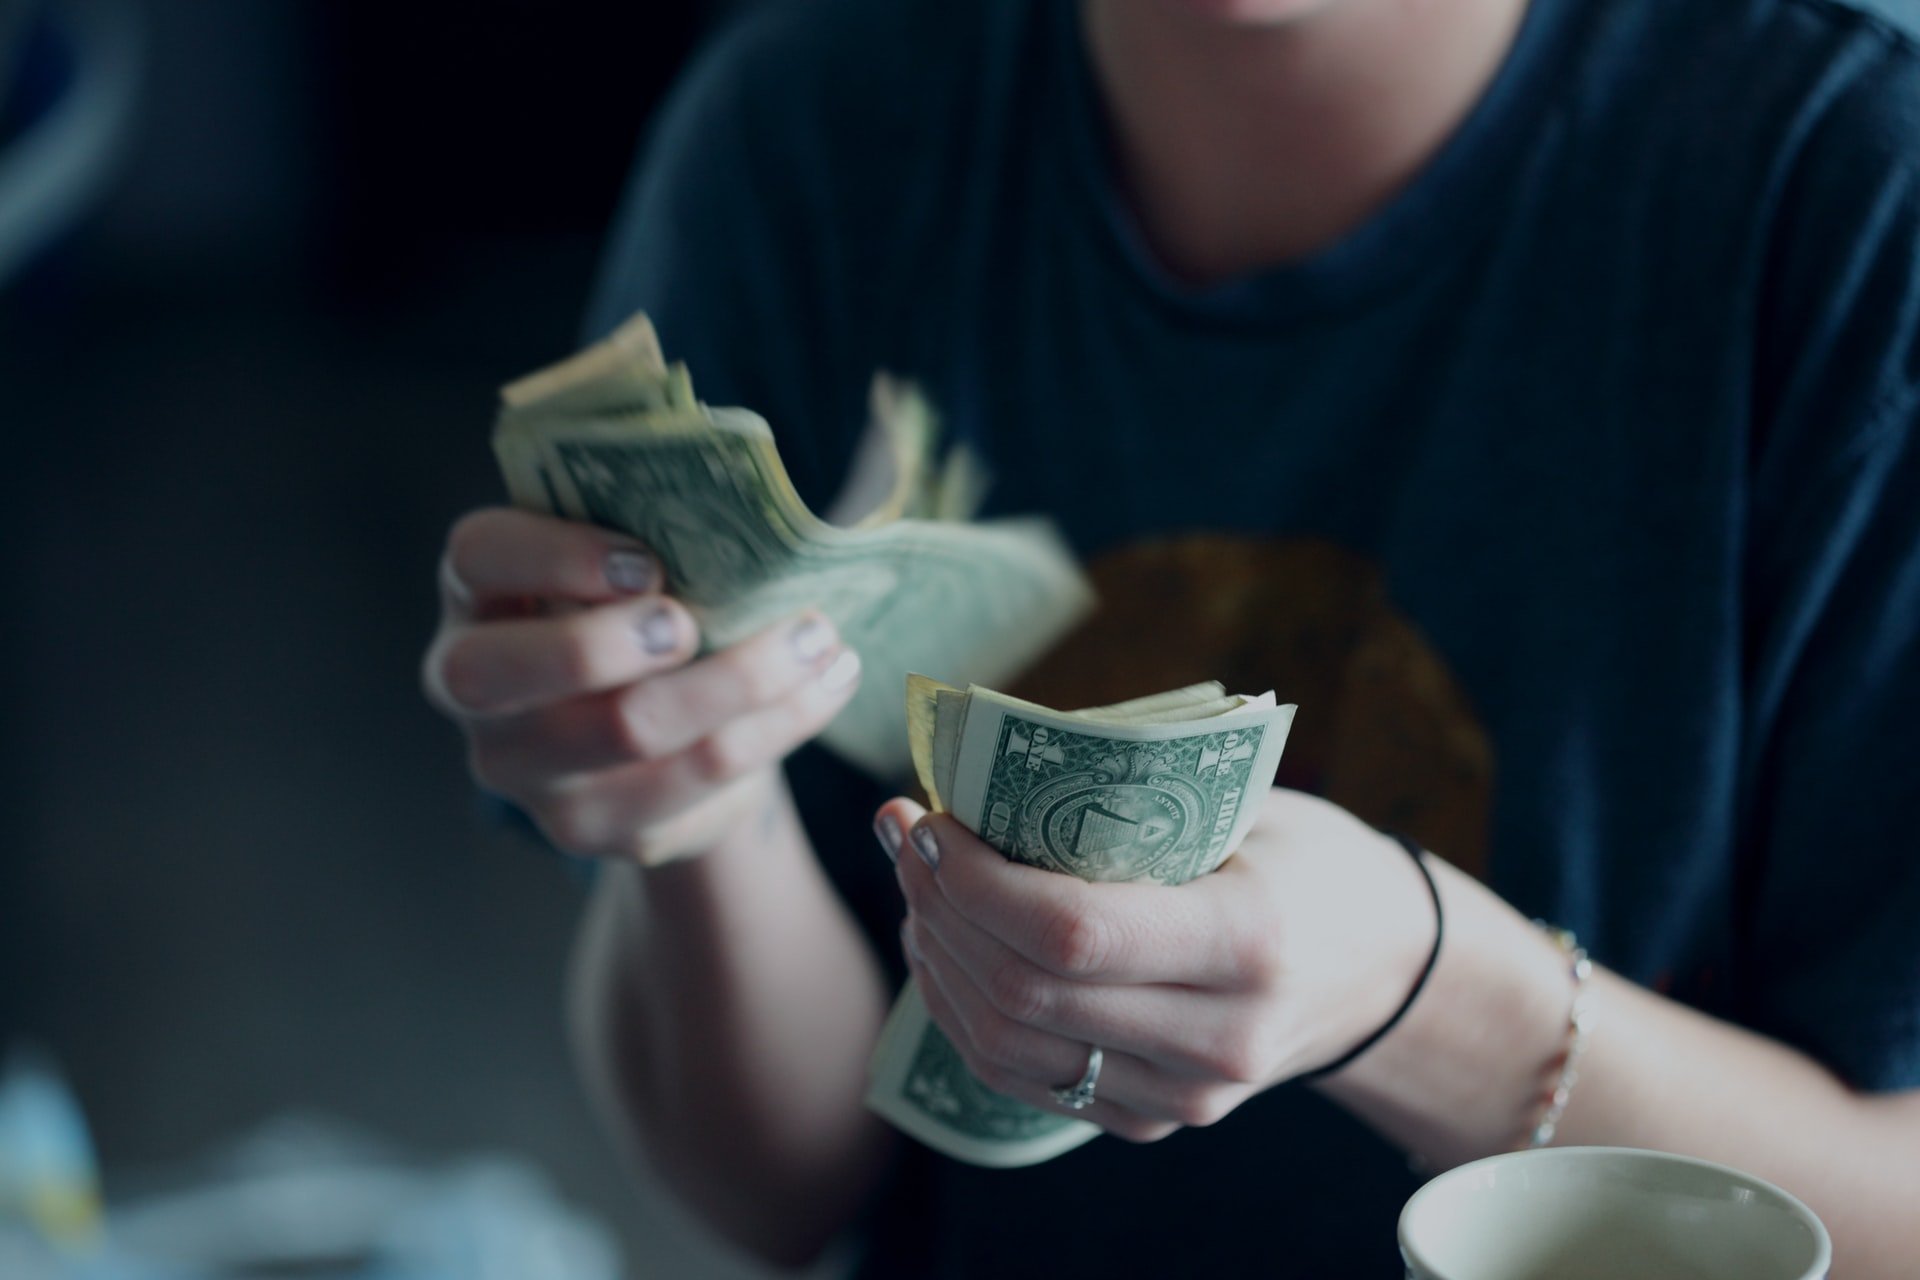 His sister stole money from his parents. | Source: Unsplash